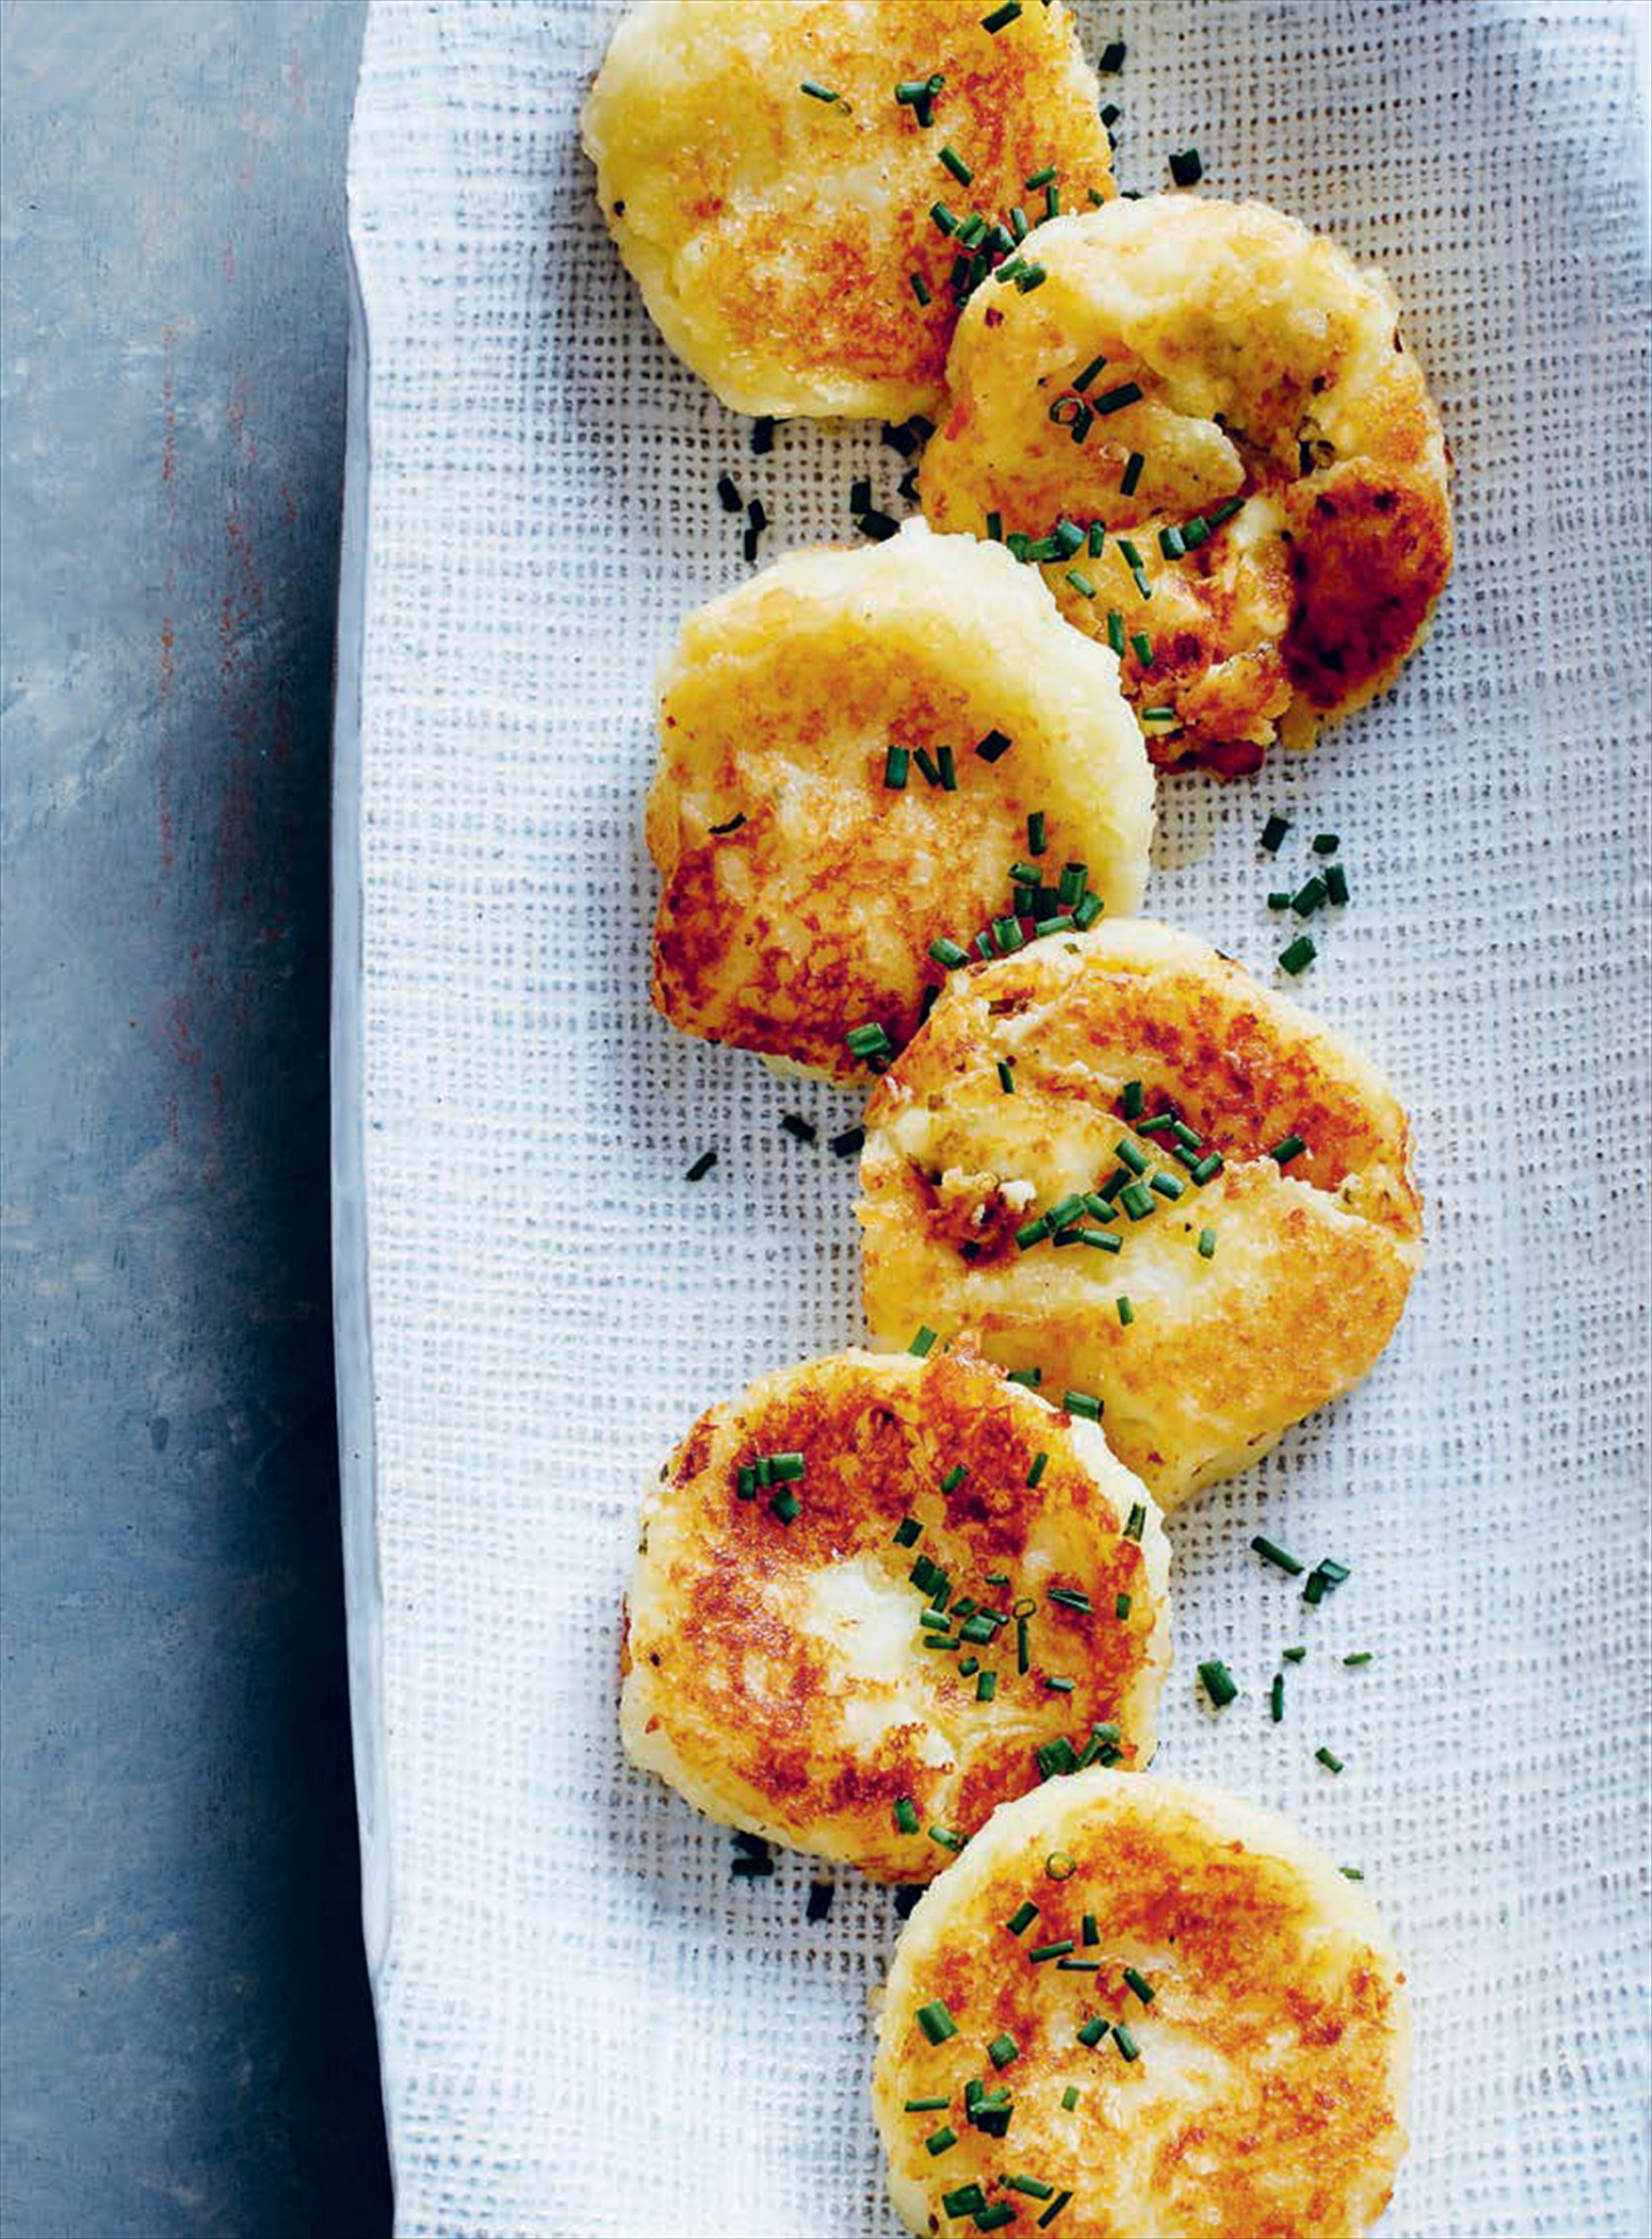 Potato dumplings stuffed with curd cheese and chives